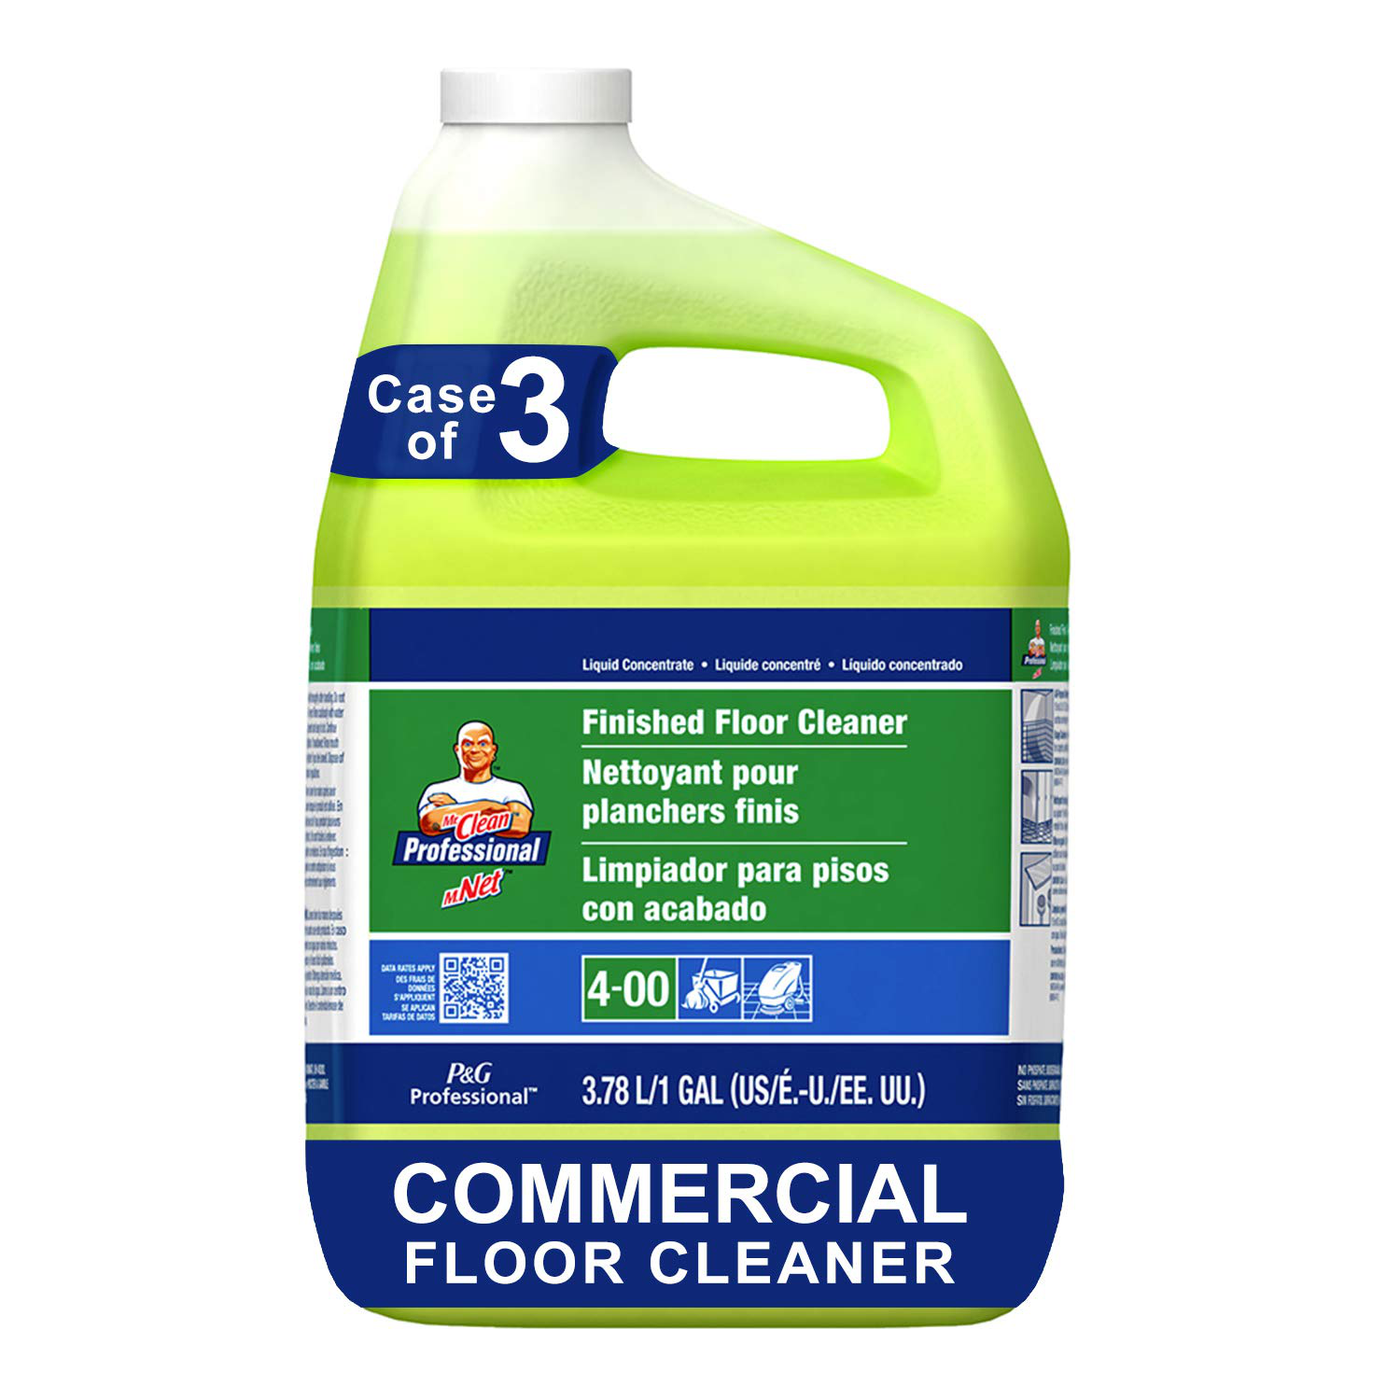 P&G Professional Floor Cleaner from Mr. Clean Professional, Bulk Liquid Concentrate fro Hardwood, tile or Terrazo Floors, Commercial Use, Lemon Scent, 1 Gal. (Case of 3) - PGC02621CT,Yellow